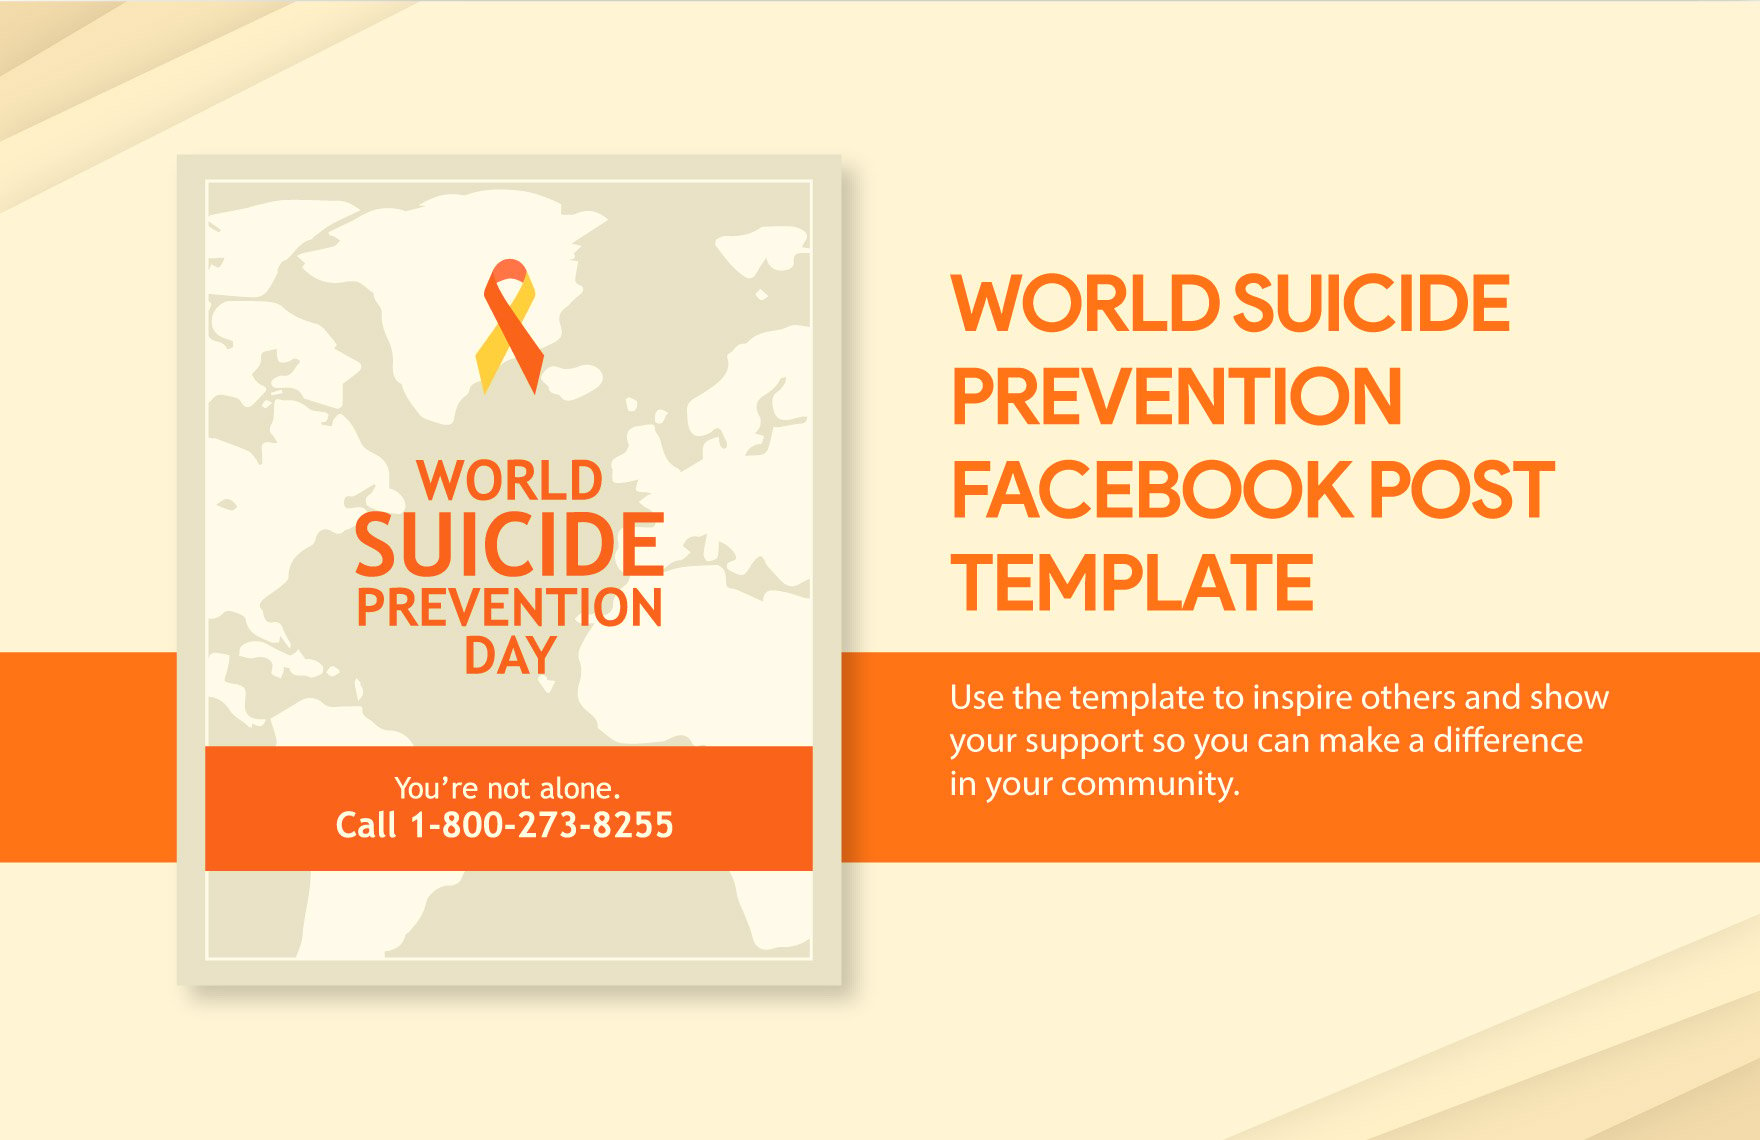 Free World Suicide Prevention Day Facebook Post Template in Illustrator, PSD, PNG